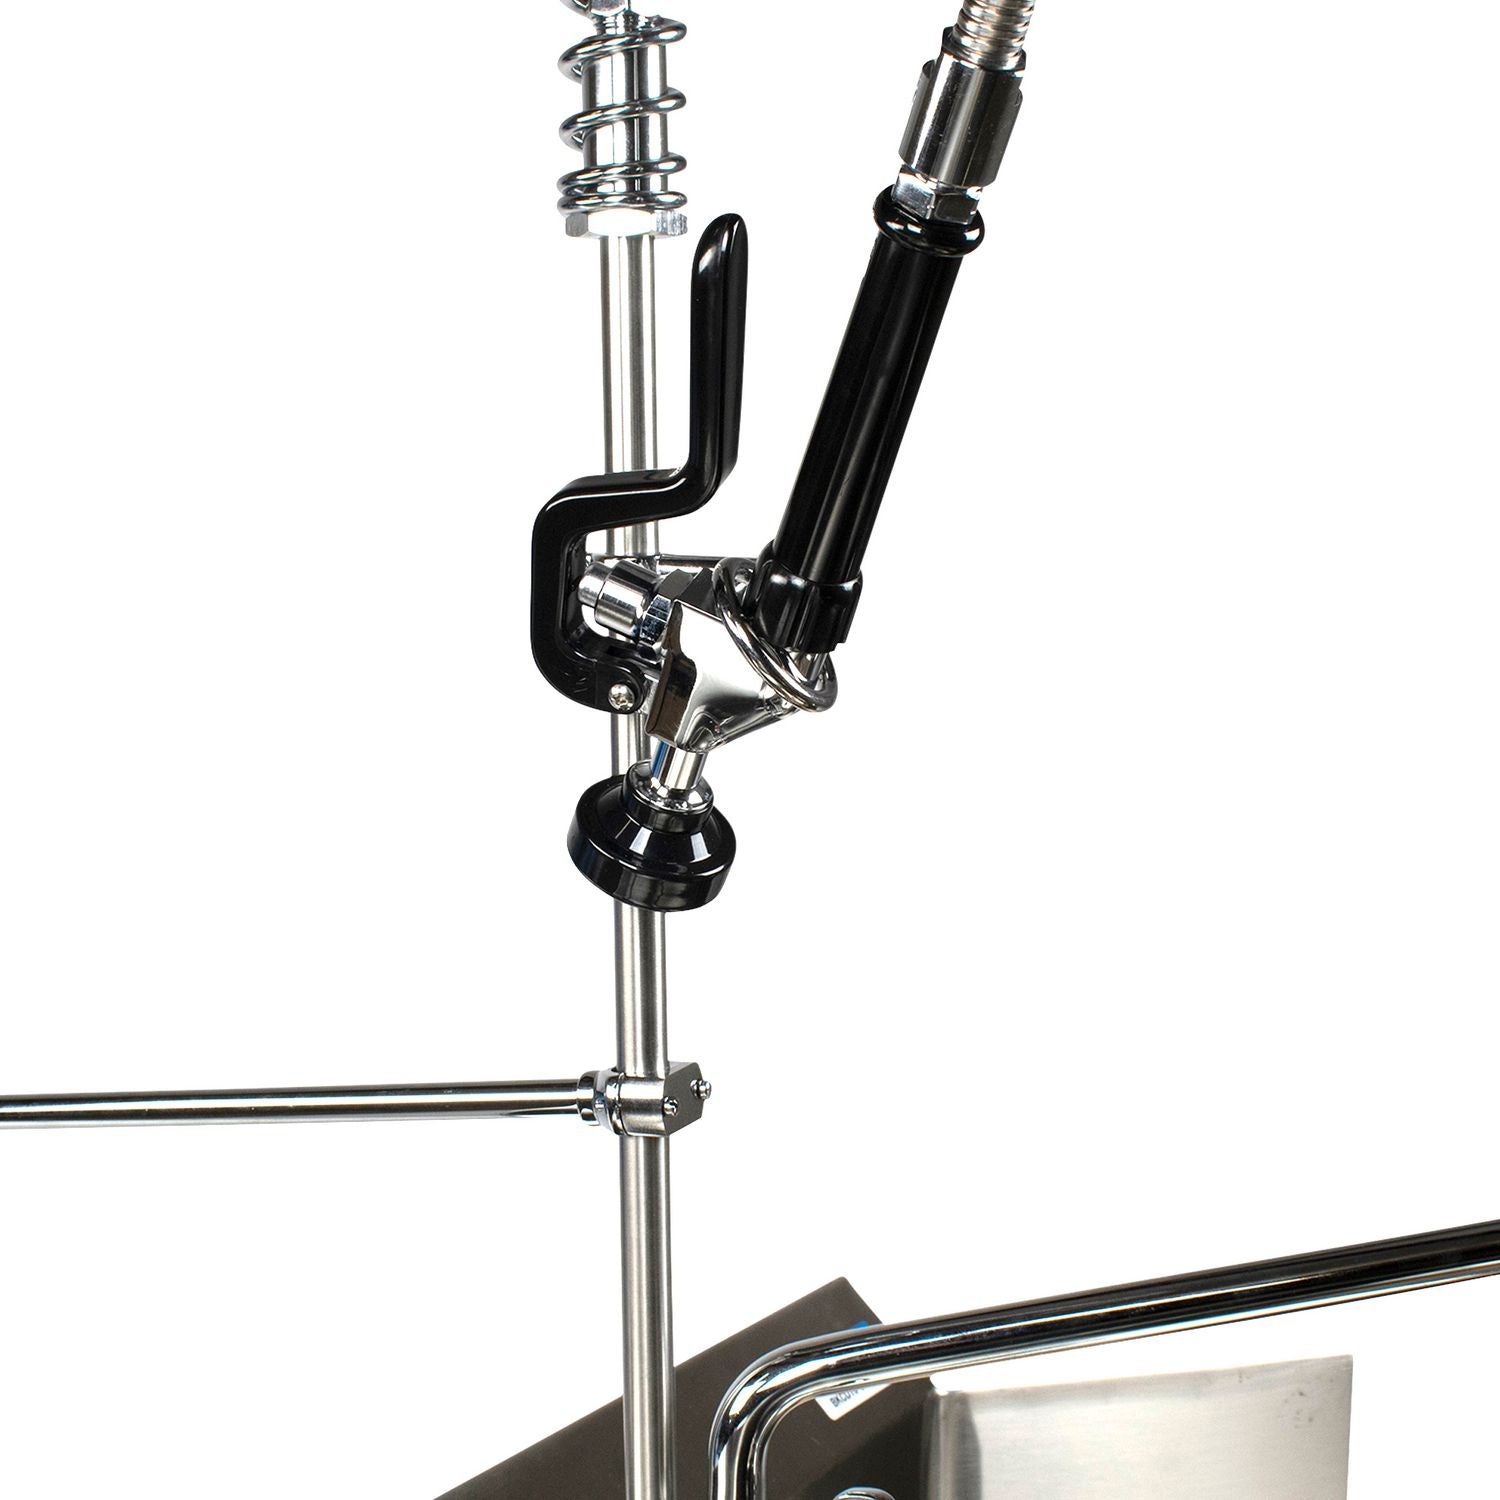 workforce-prerinse-add-a-faucet-462-height-12-reach-chrome-ships-in-4-6-business-days_bkevsmpraf12m - 4